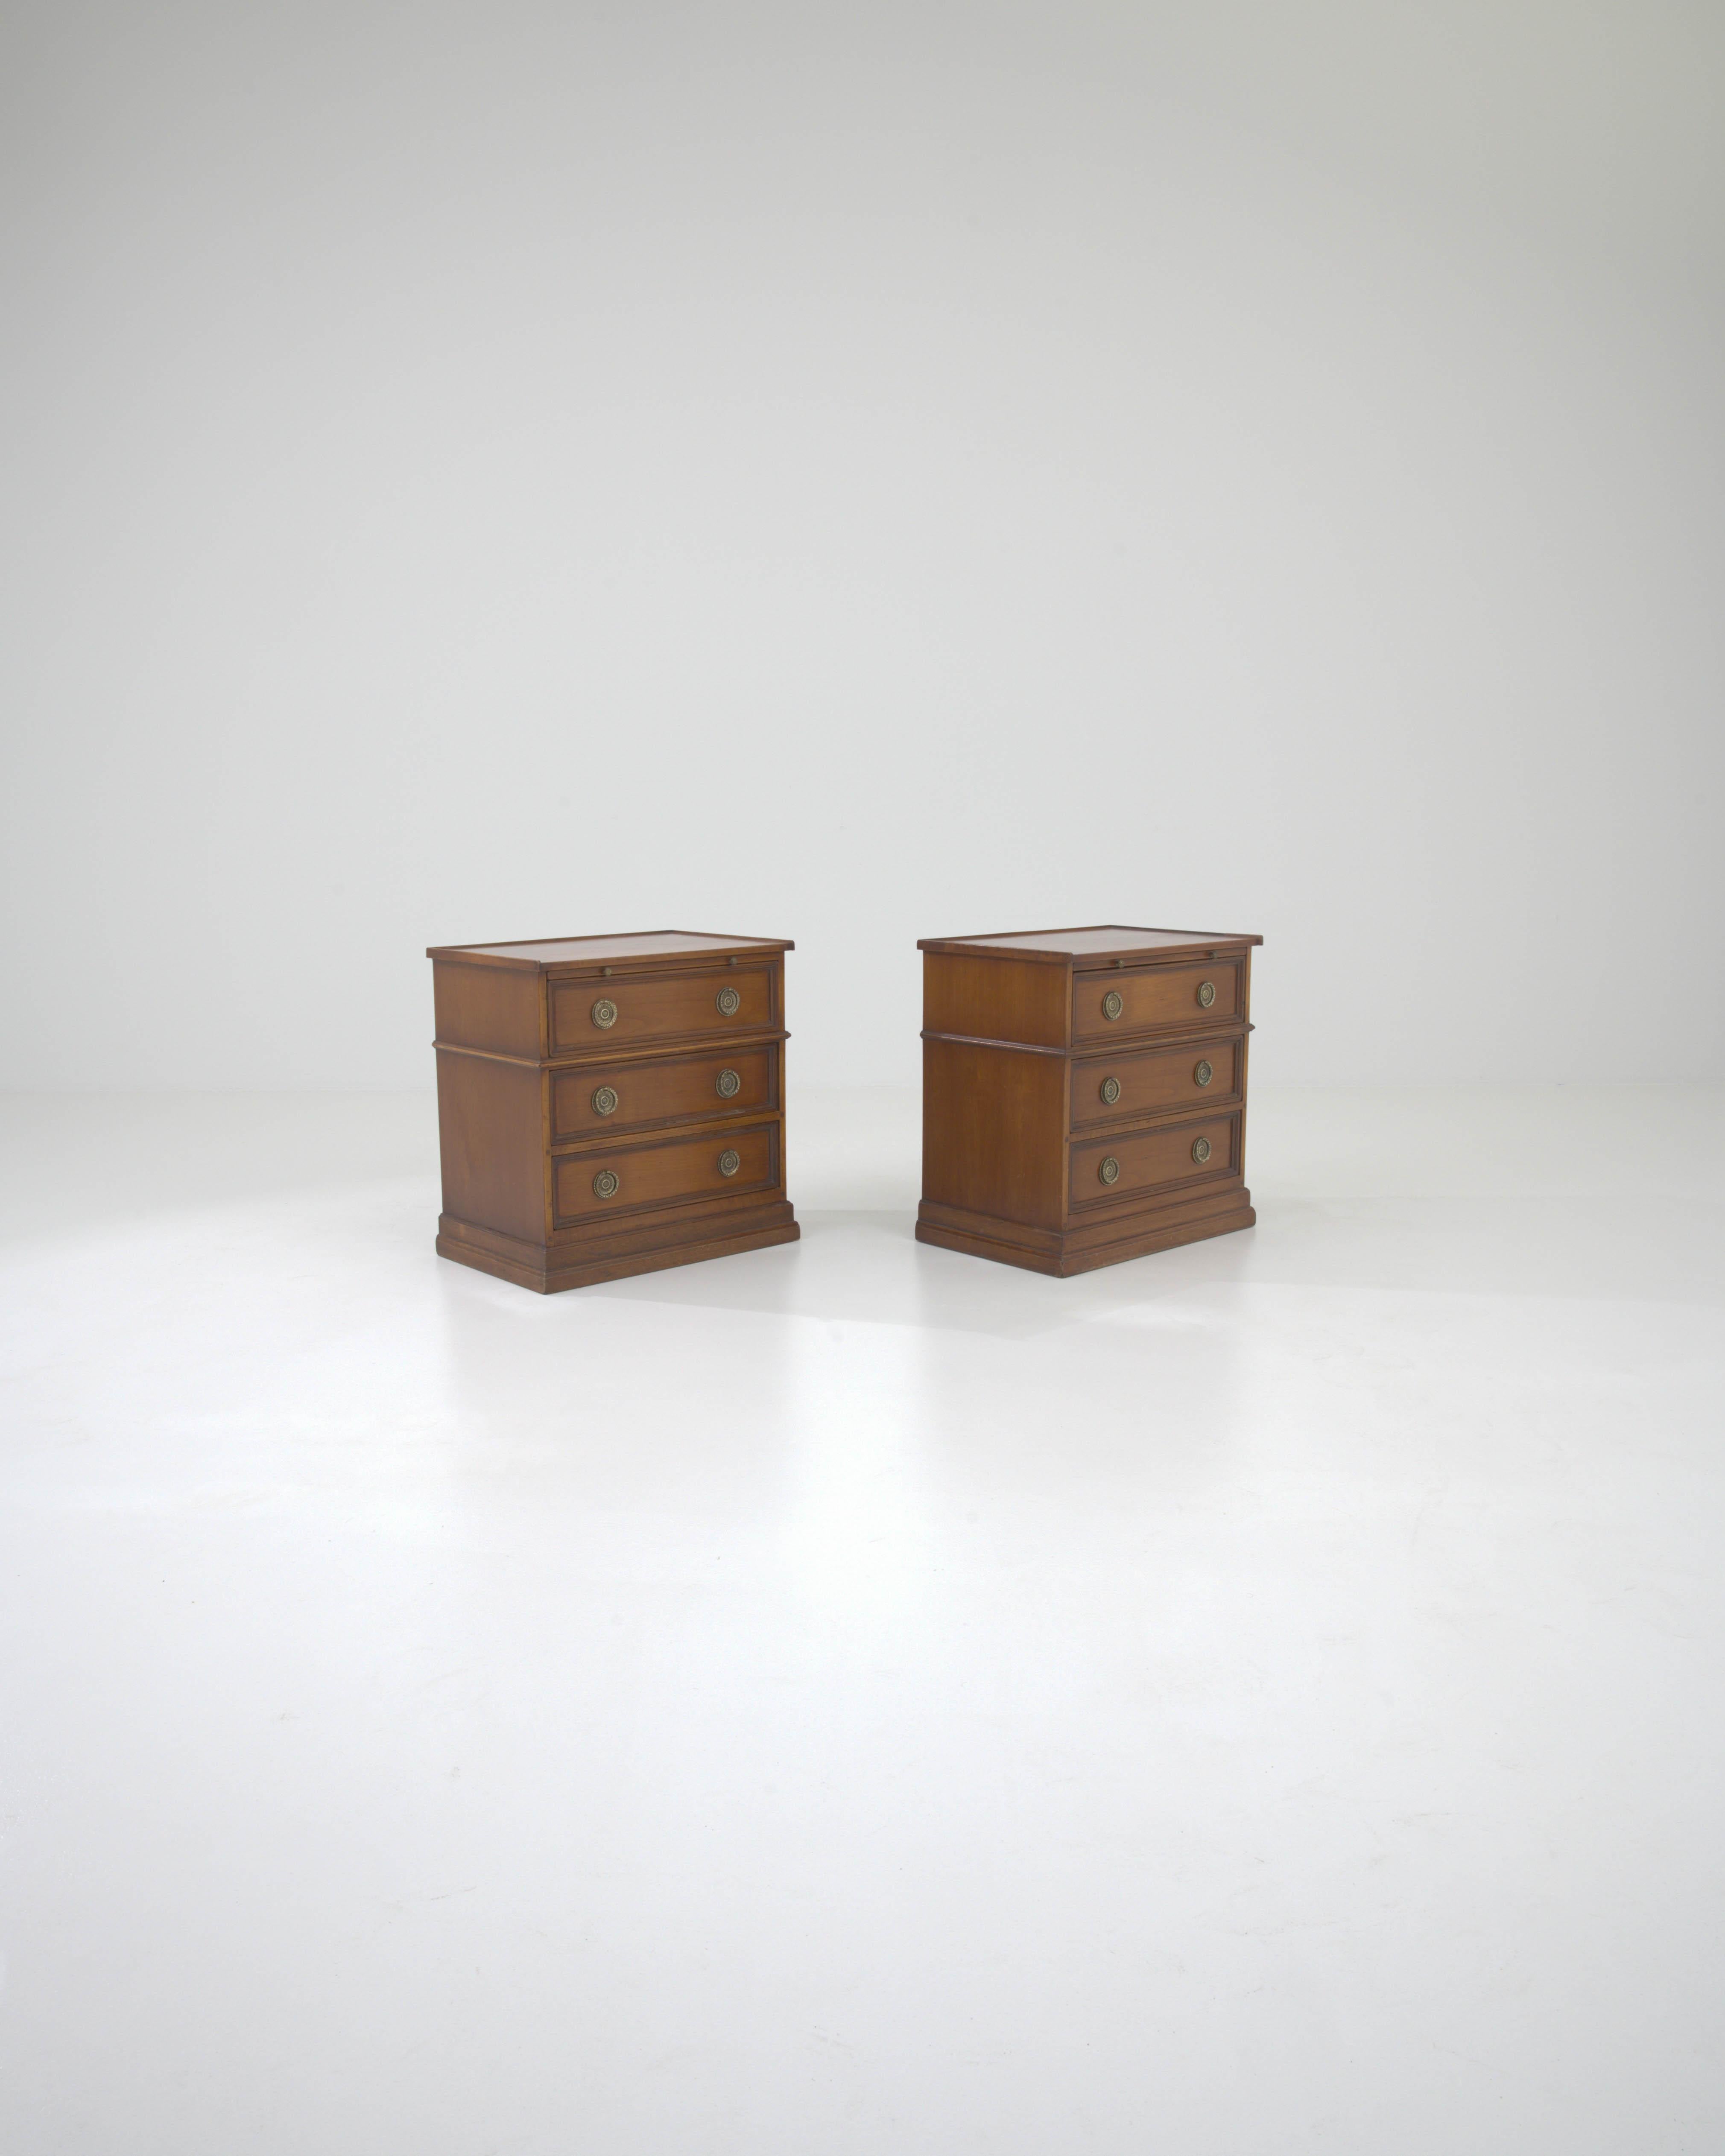 Early 20th Century British Wooden Bedsides With Original Patina, a Pair For Sale 2